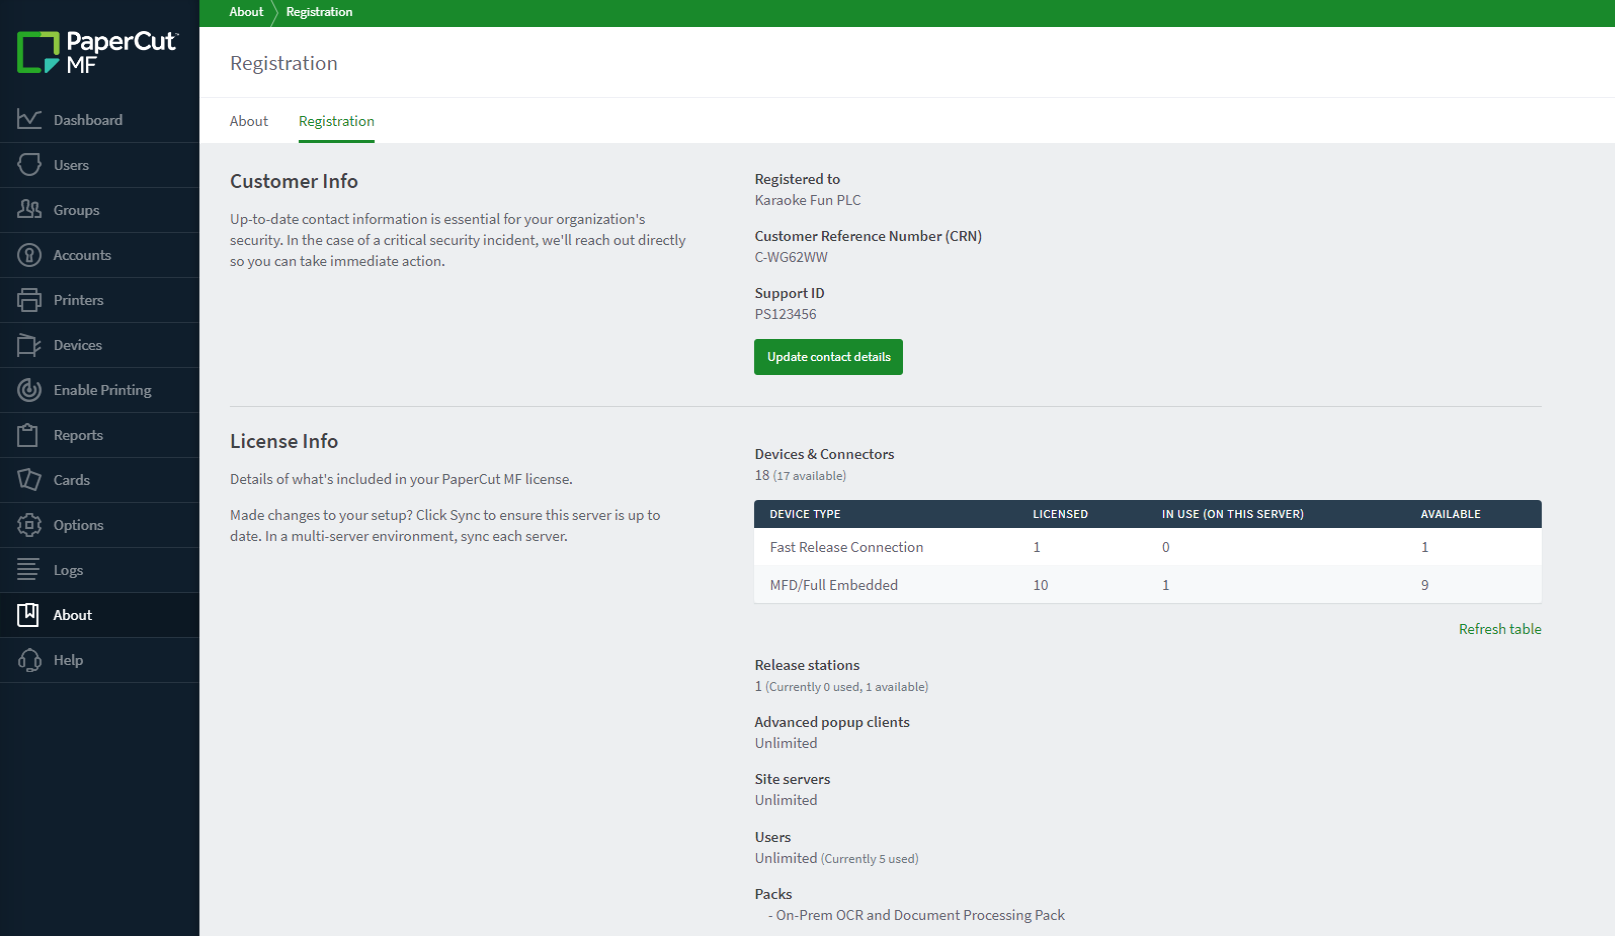 Screenshot showing the License Info section of the admin interface, under About > Registration